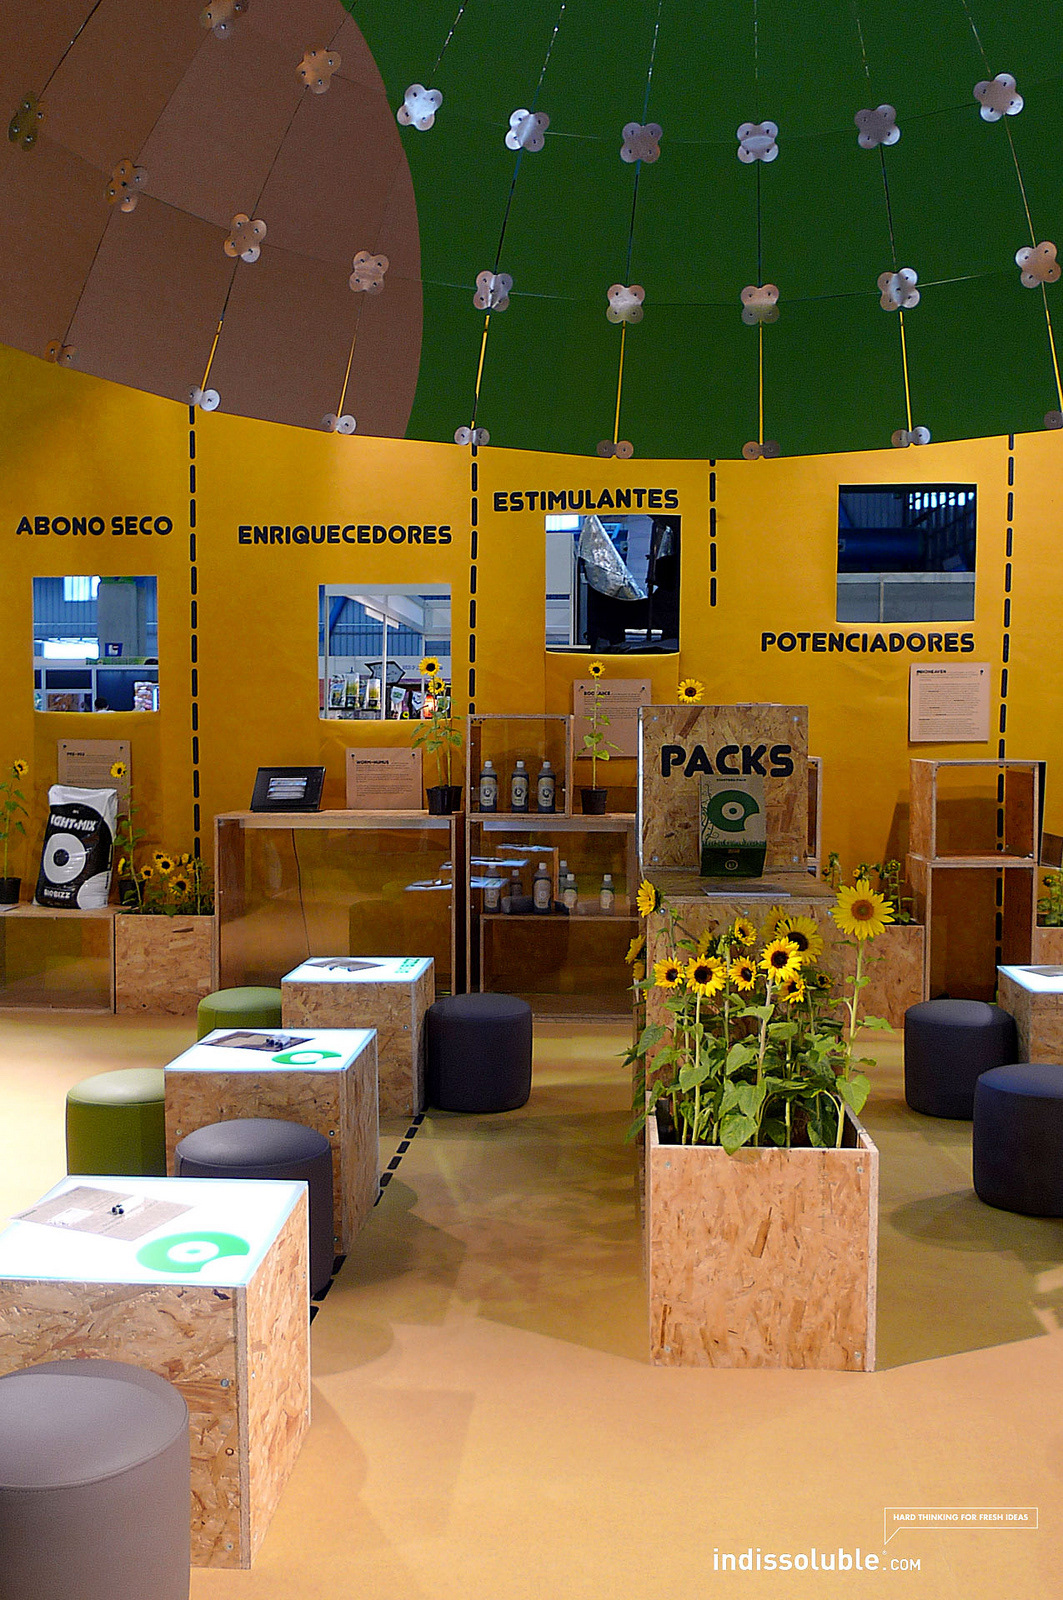 biobizz Stand Exhibition  design indissoluble barcelona spain dome cardboard Sustainable Holland dutch